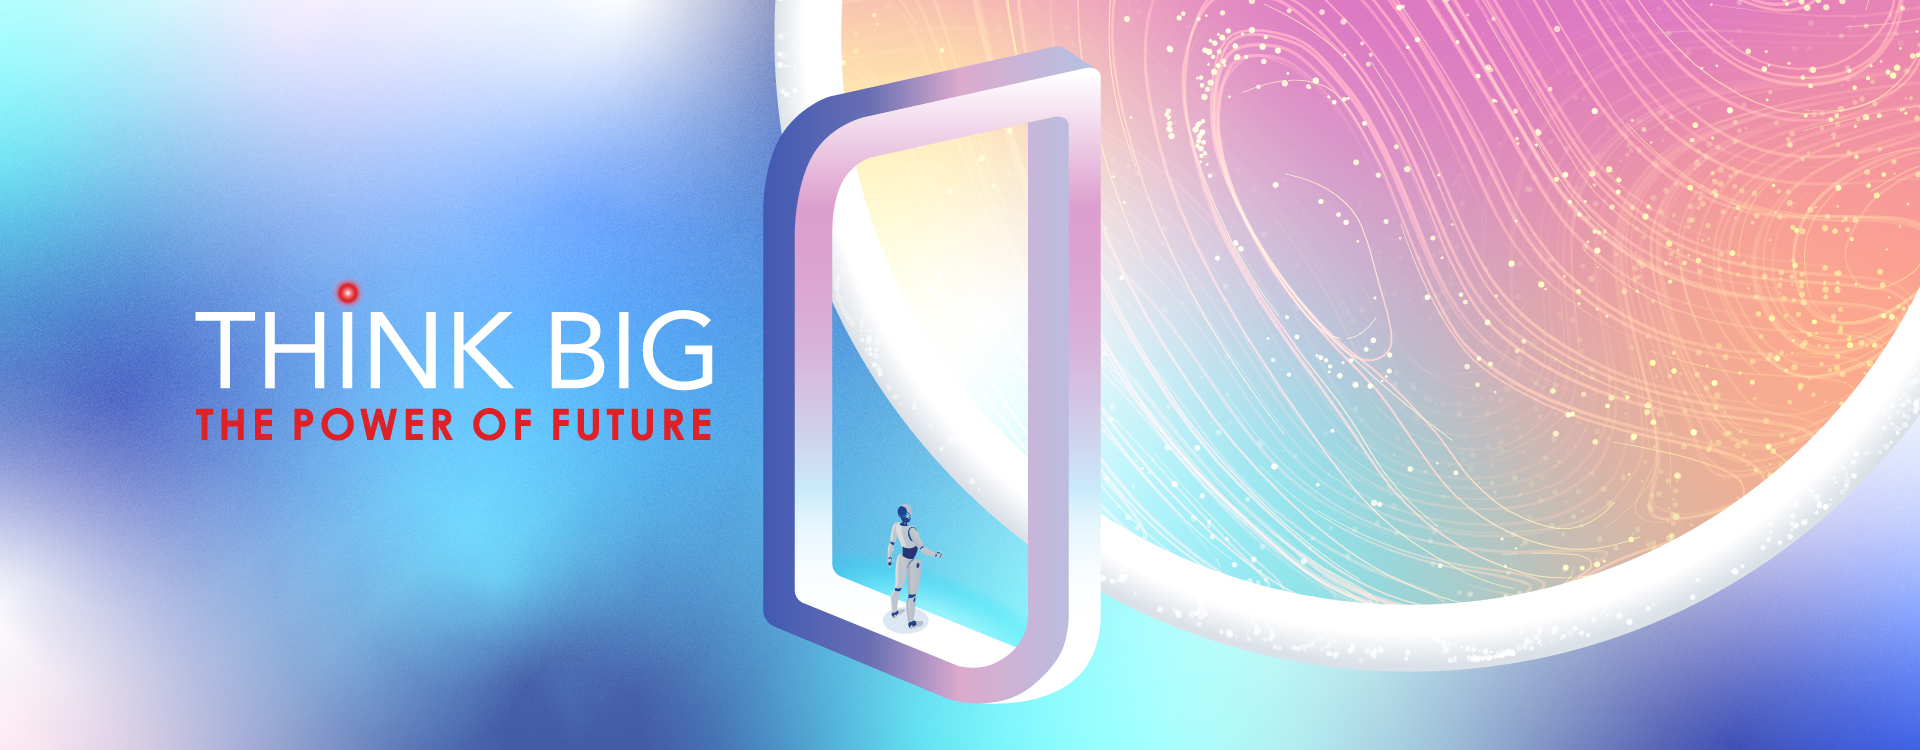 THINK BIG – The Power of Future